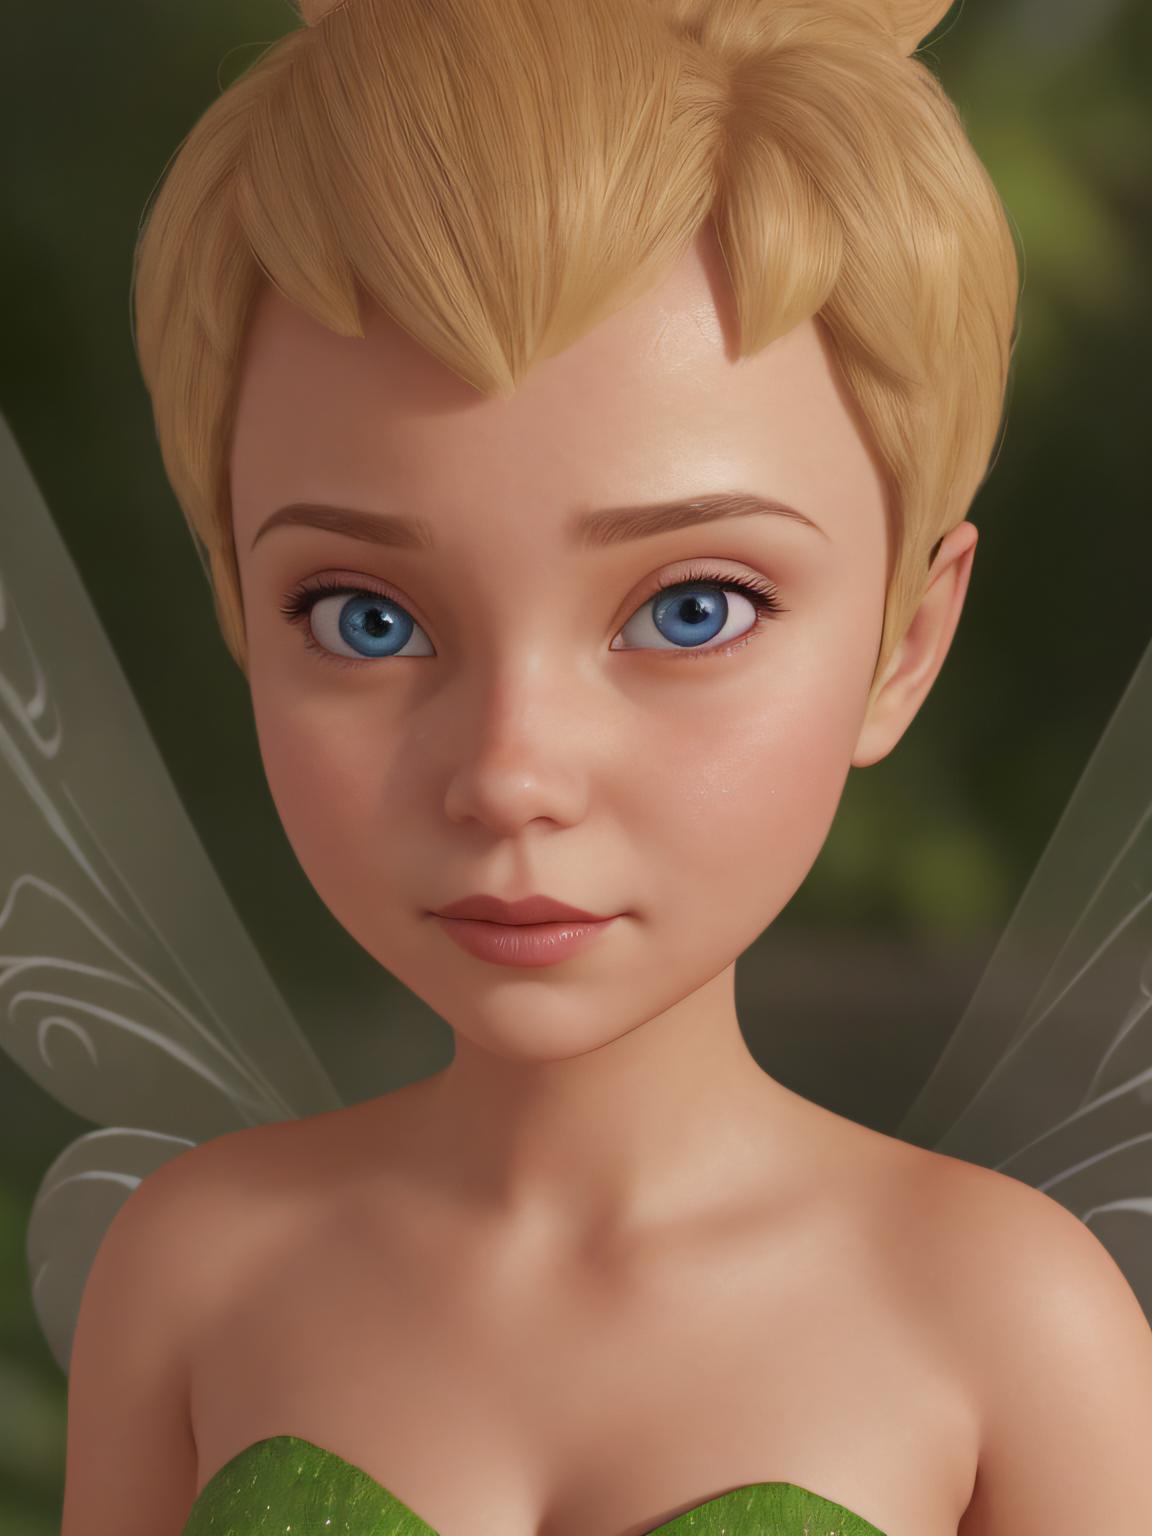 TinkerBell - (Disney Fairies) Tinker Bell Movie image by Butts69